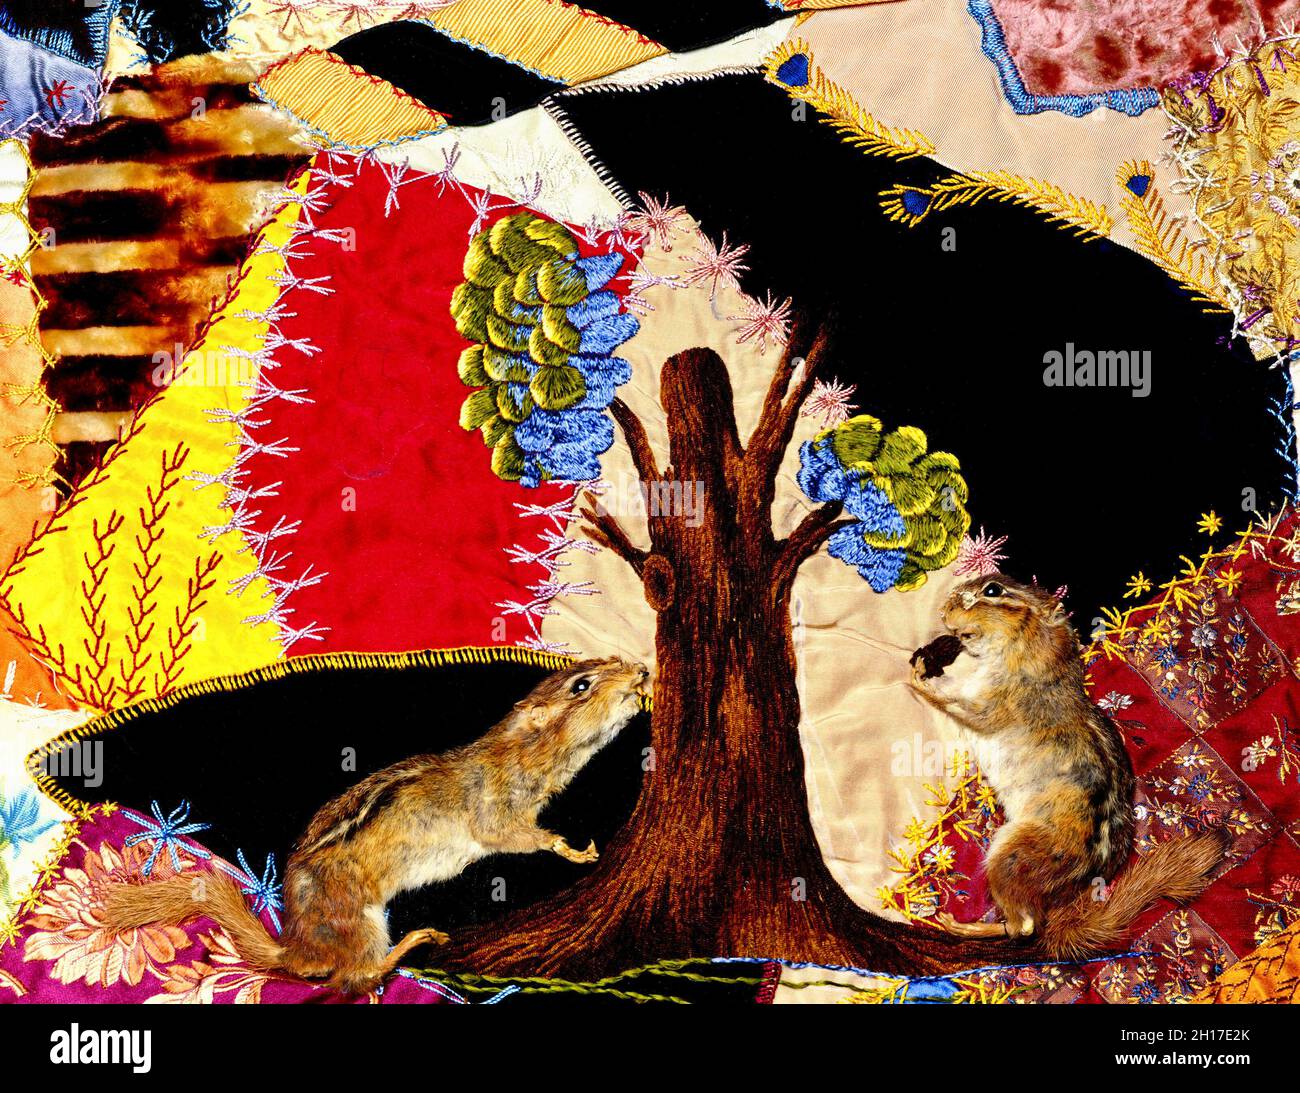 American Quilting Art - Chipmunk and Bird Crazy Quilt - Mme David McWilliams - 1882 Banque D'Images